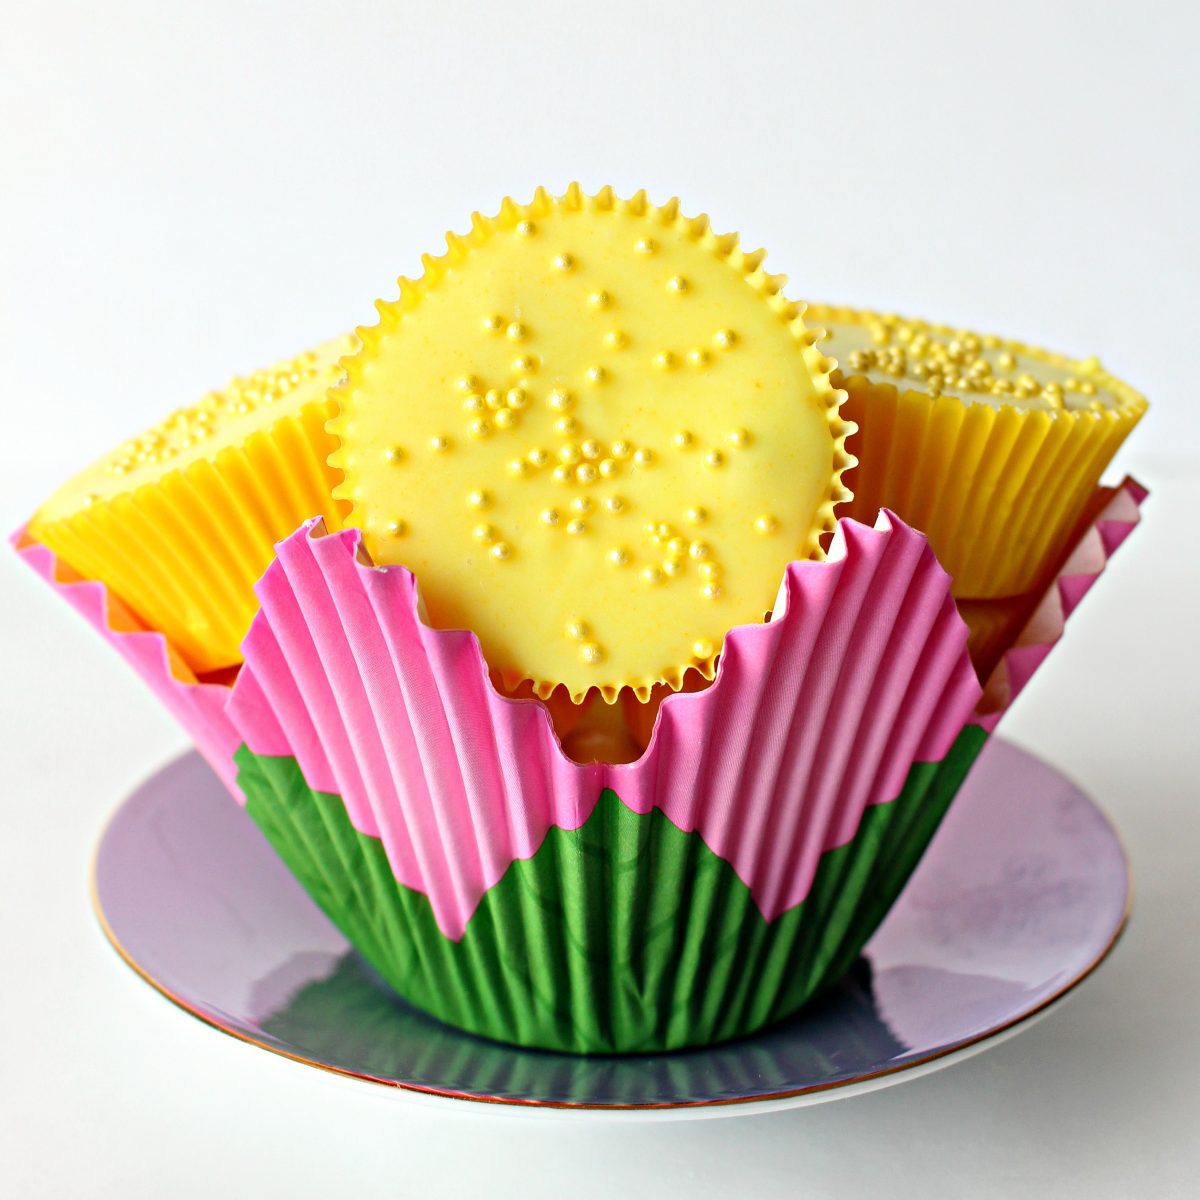 Yellow peanut butter cups in a cupcake paper shaped like a flower.